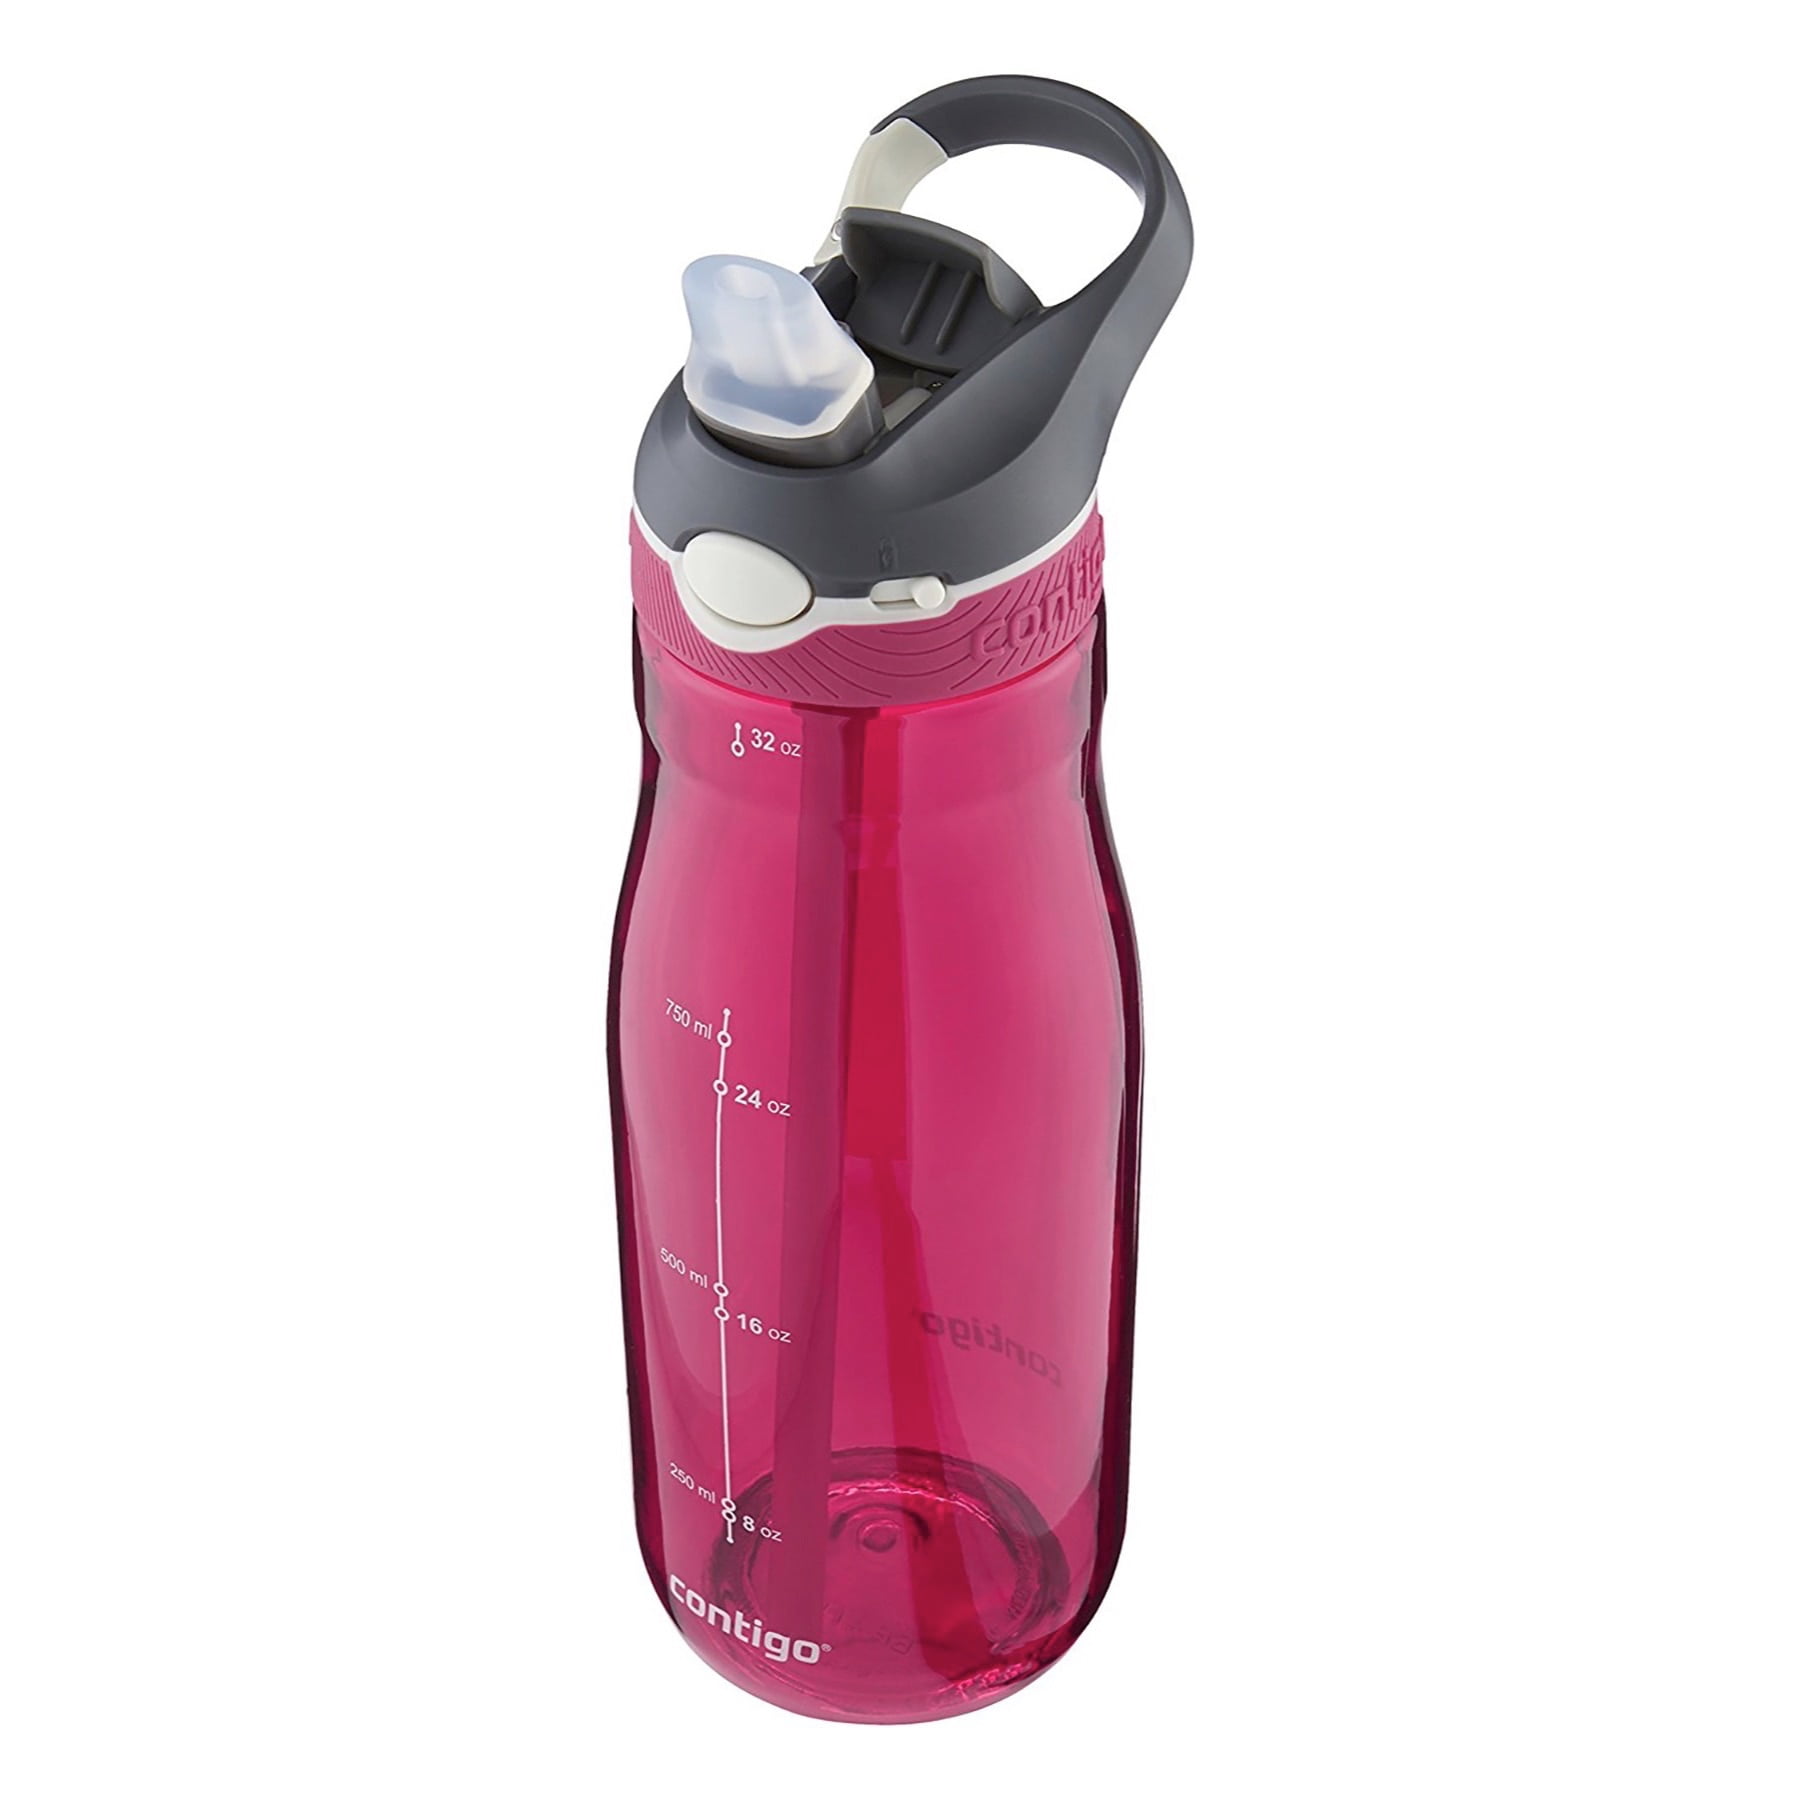 Tahoe© 32 oz. Insulated Water Bottle - Pink